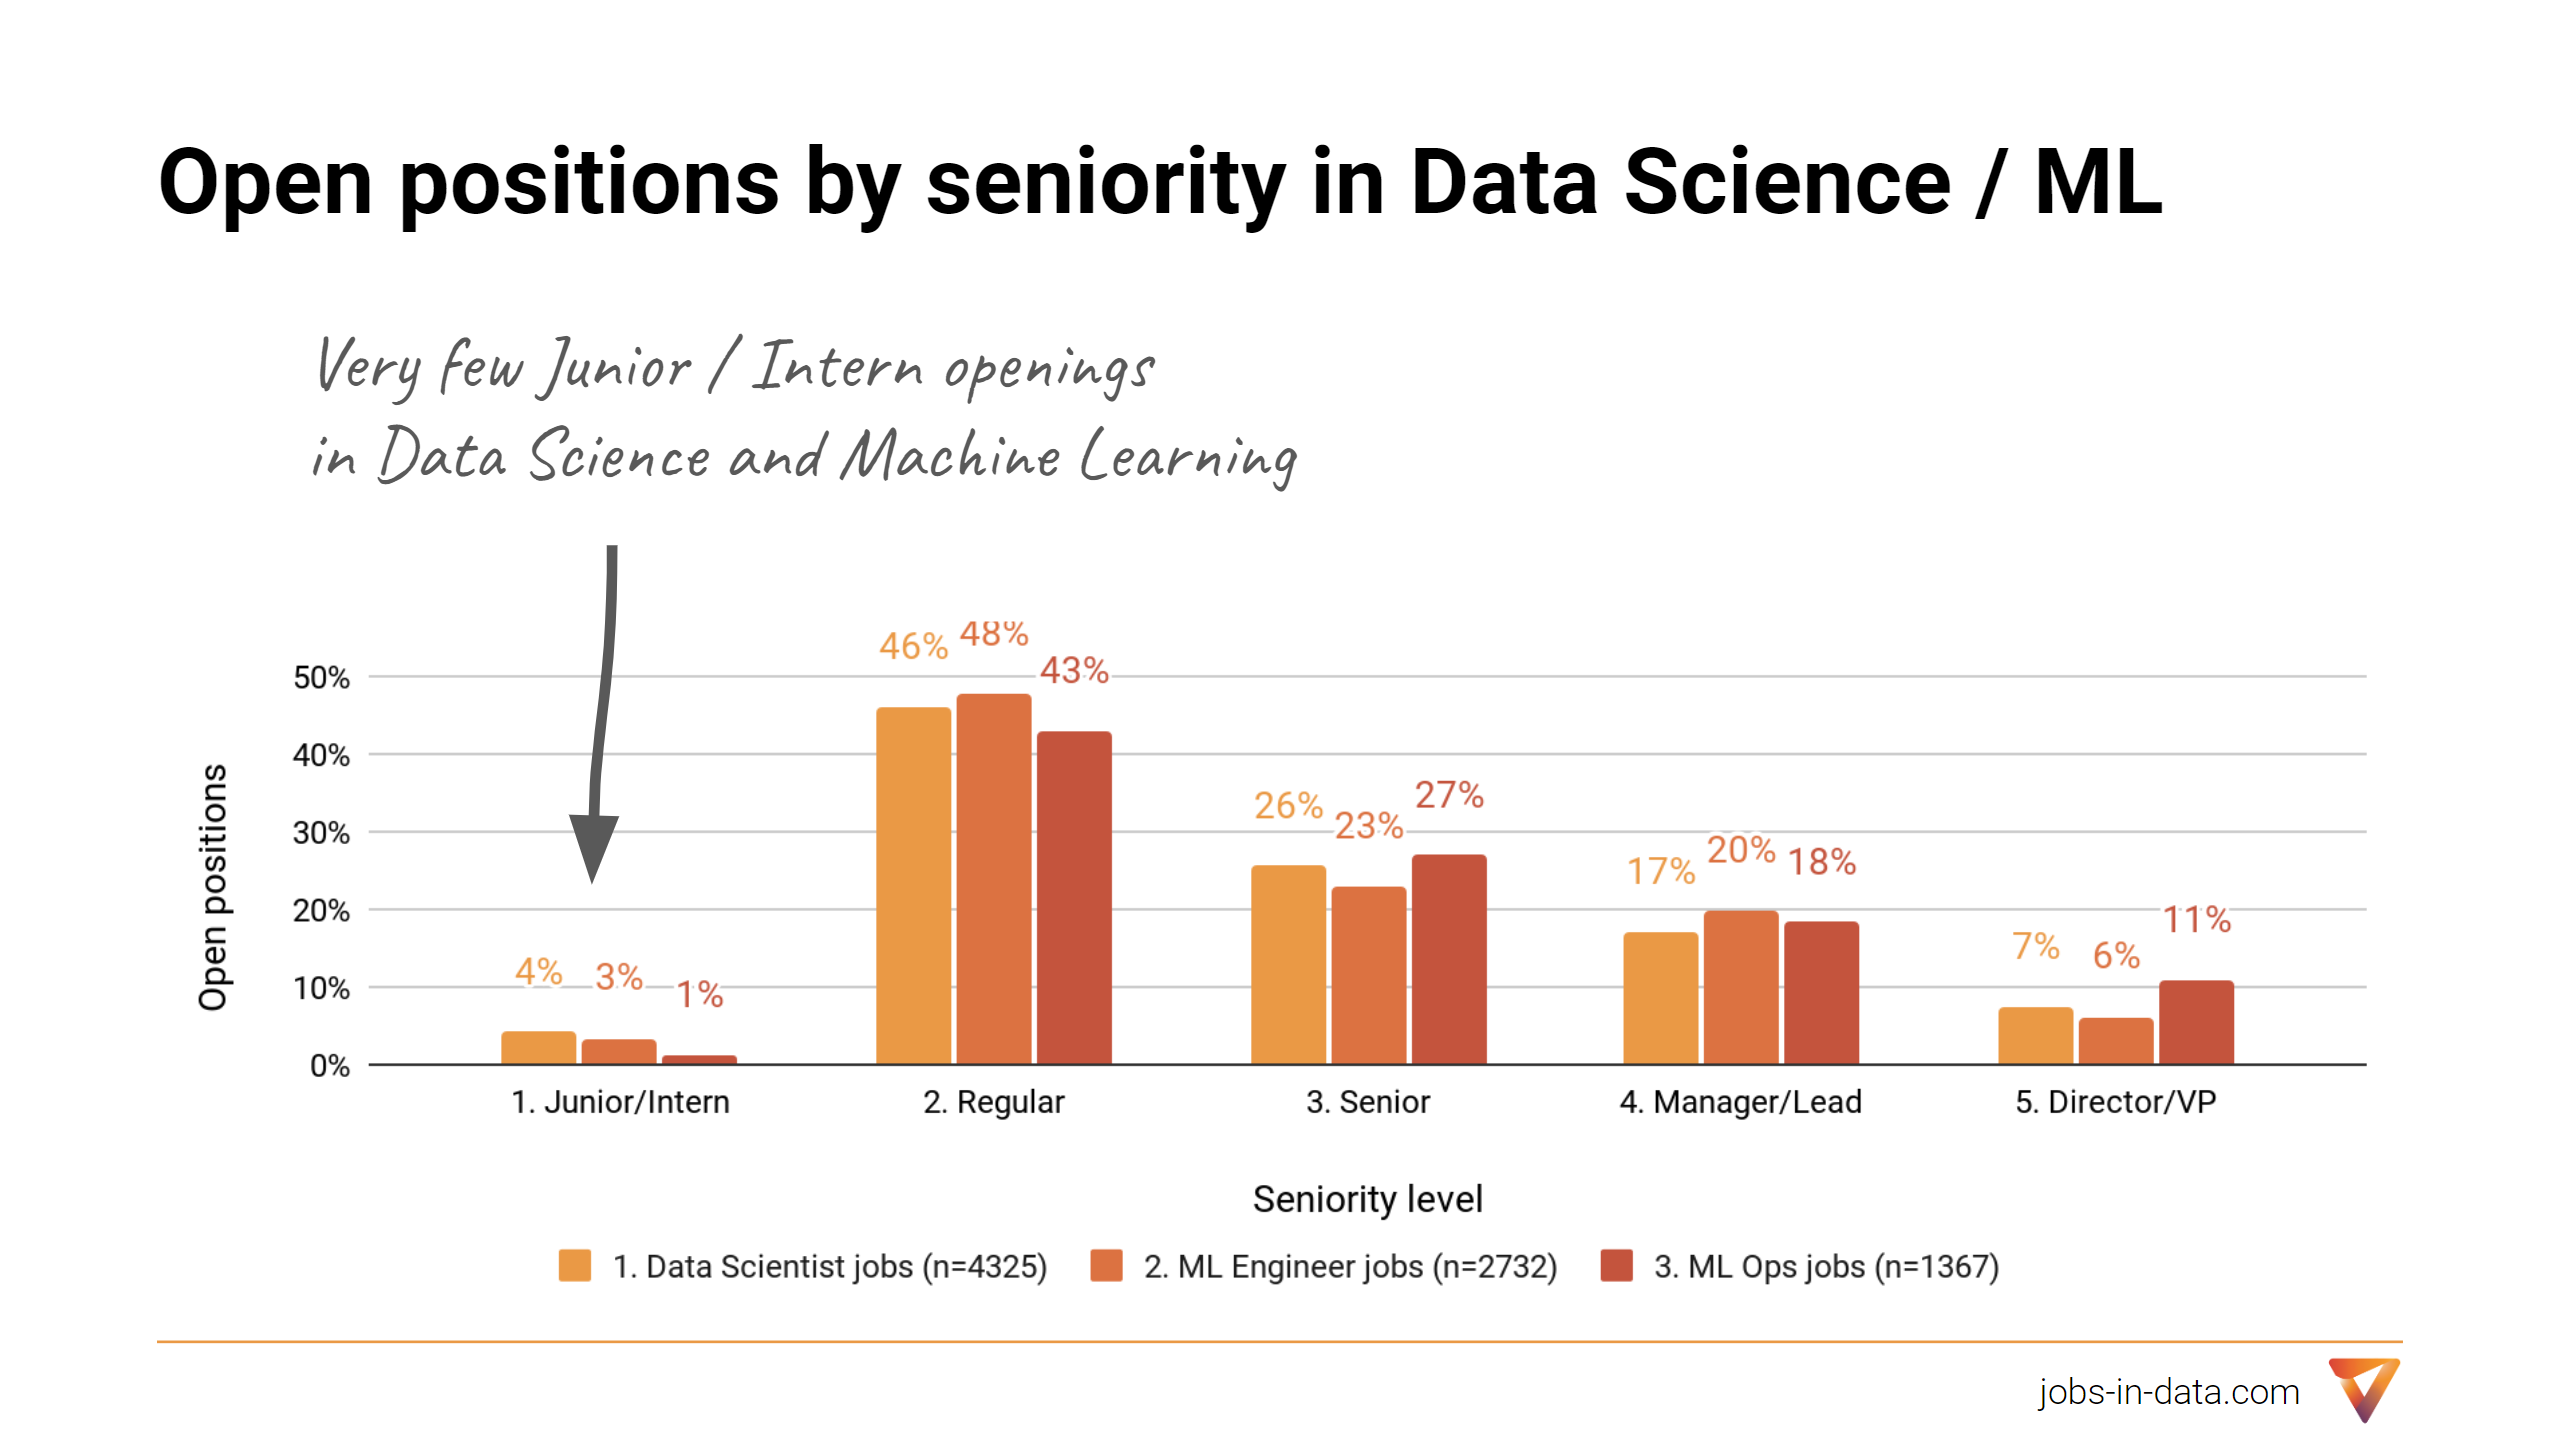 Open positions by seniority in Data Science and Machine Learning jobs